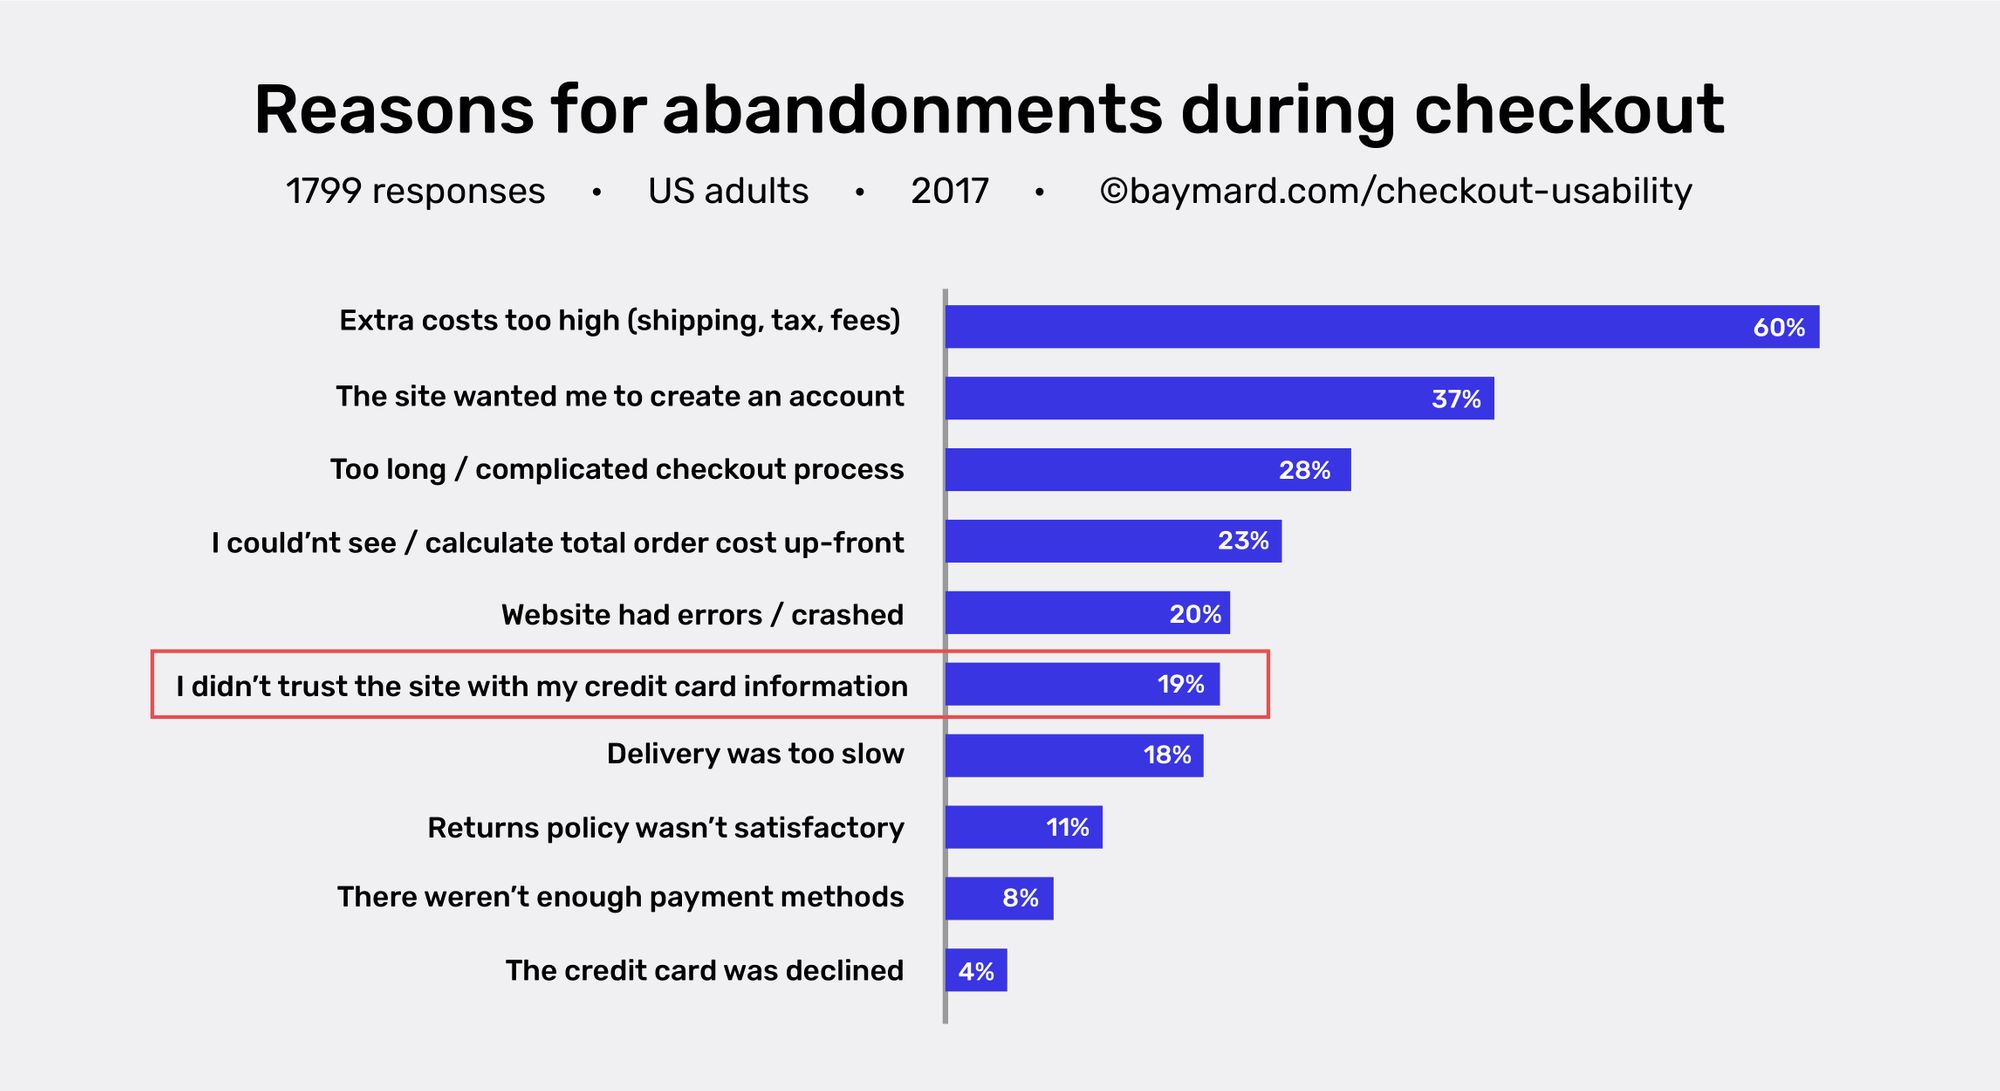 Reasons for abandonments during checkout, a 2017 study by Baymard Institute.